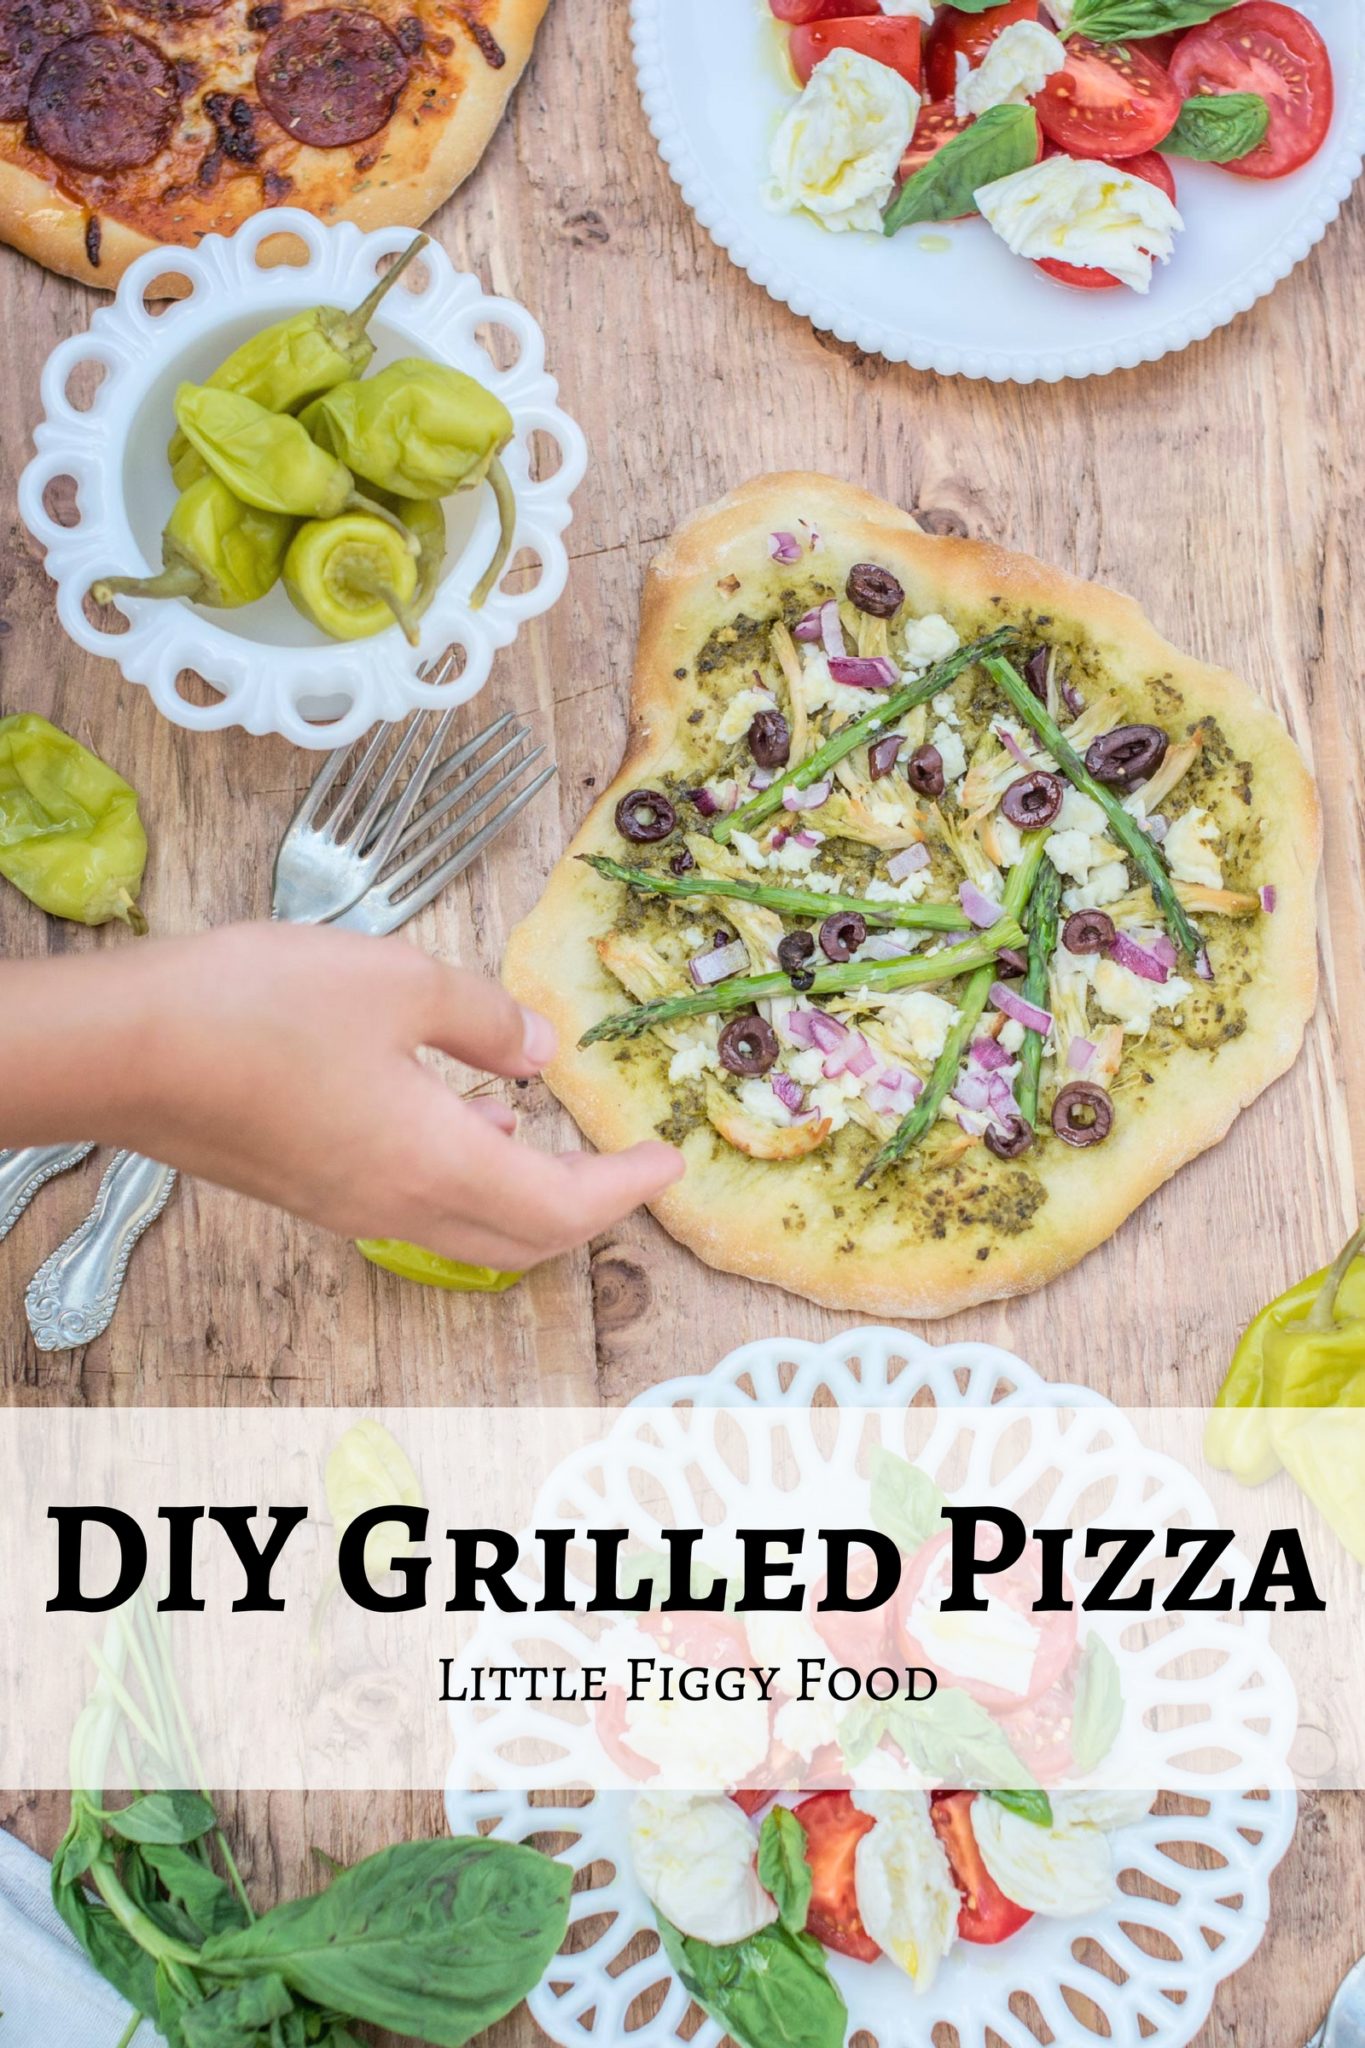 Make your grilled pizza your way then bake it up on the grill or in a wood fire pizza oven for the best pizza you'll ever enjoy! Recipe at Little Figgy Food. #ad